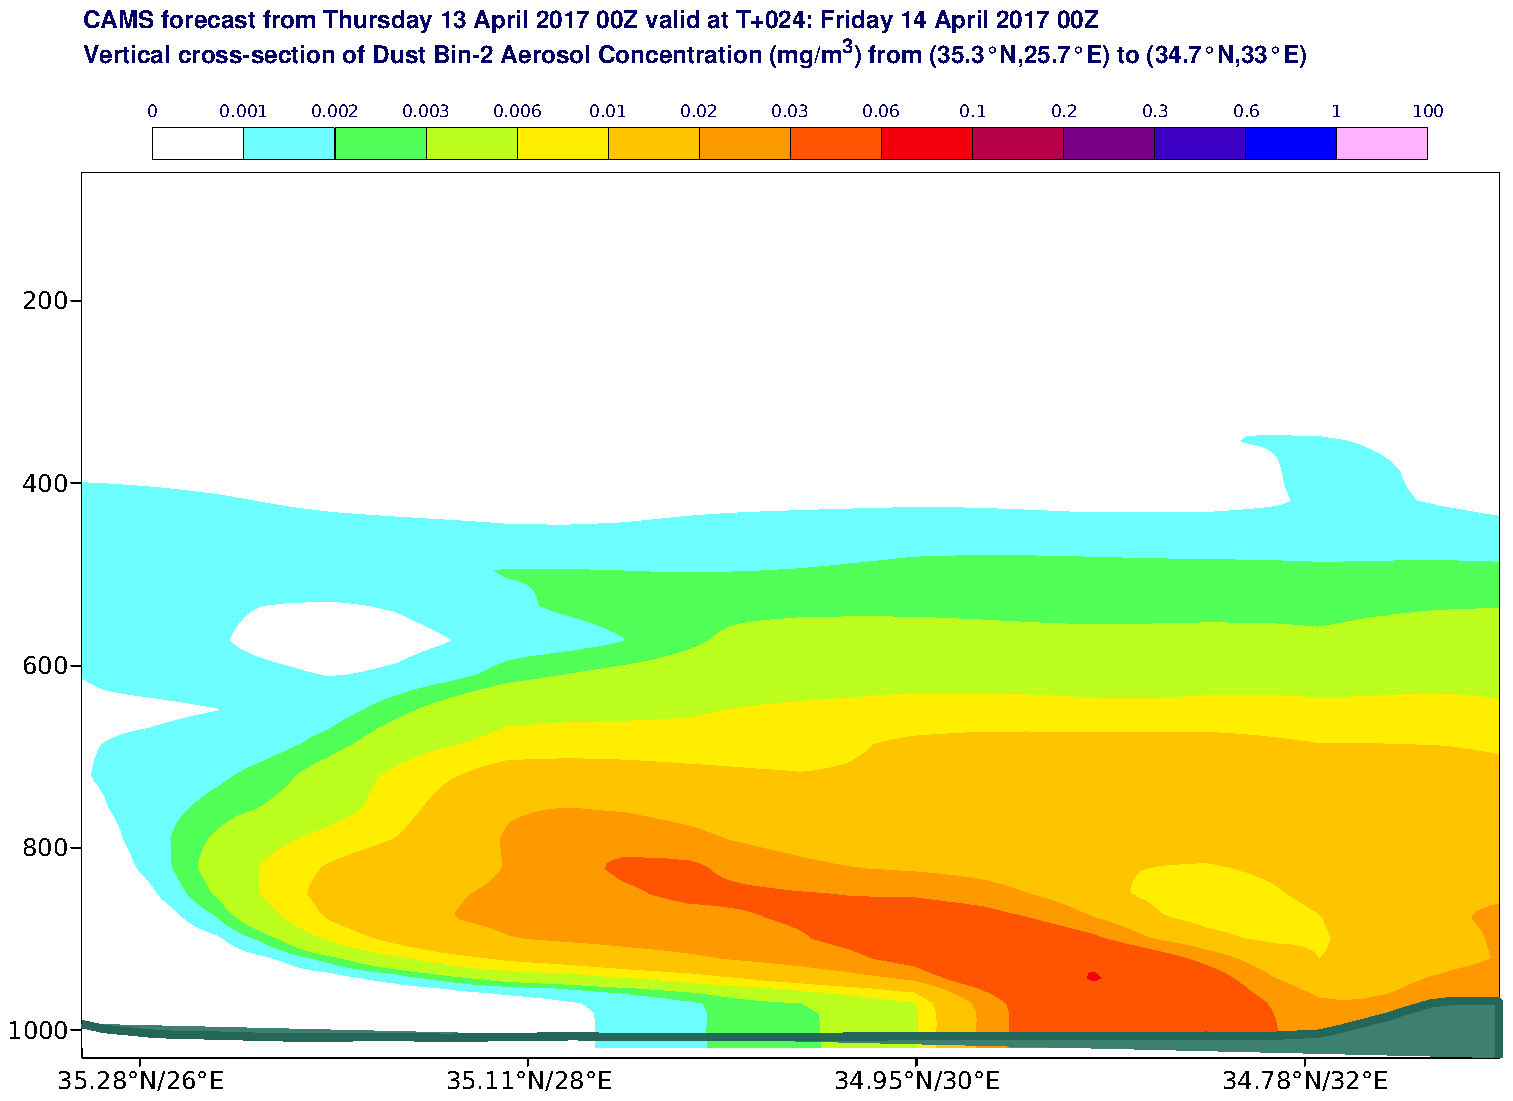 Vertical cross-section of Dust Bin-2 Aerosol Concentration (mg/m3) valid at T24 - 2017-04-14 00:00